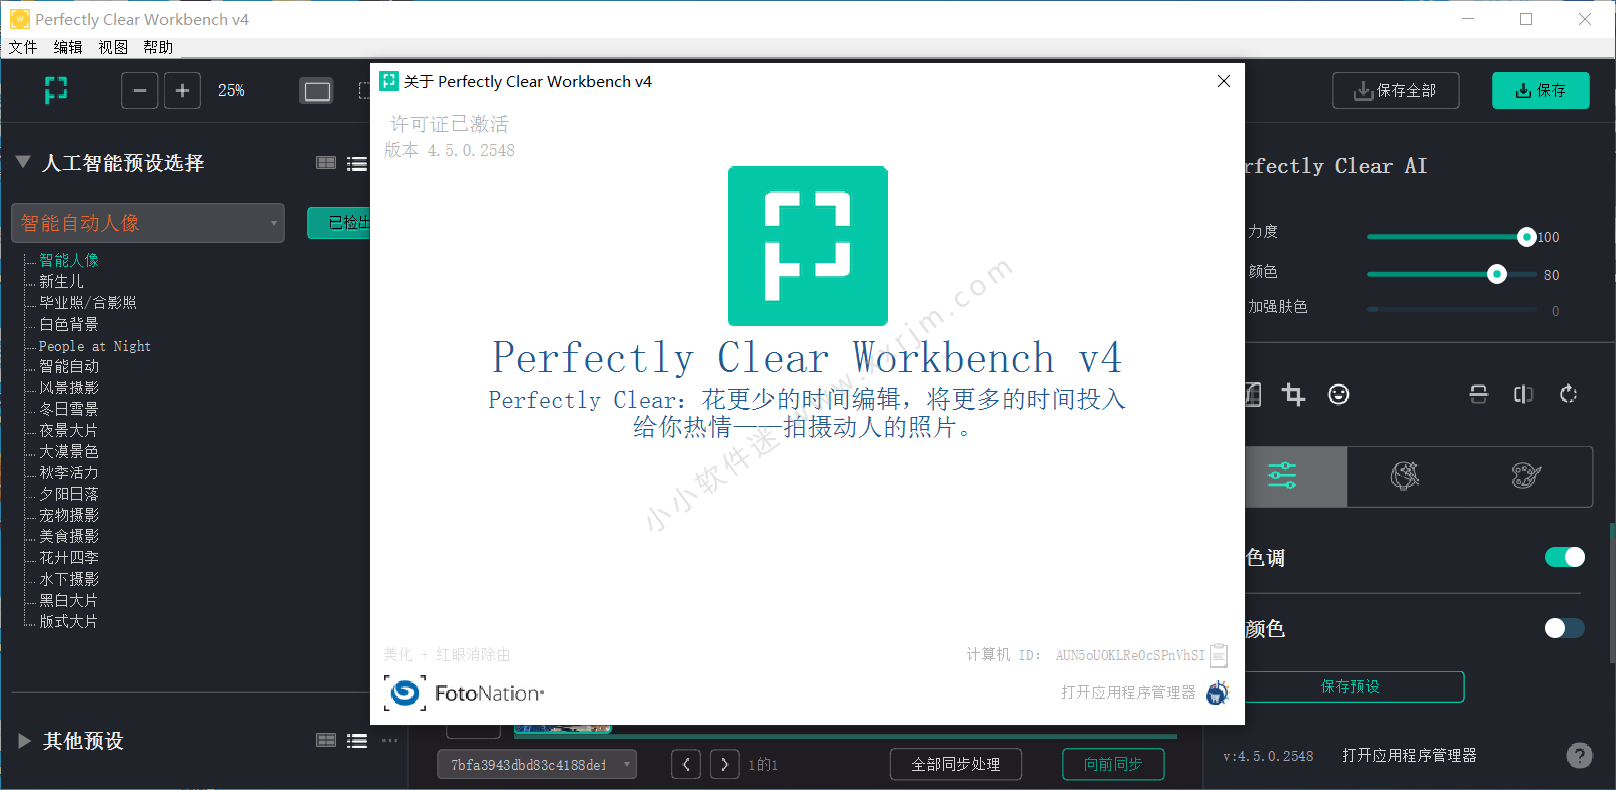 Perfectly Clear WorkBench 4.5.0.2548 instal the new for windows